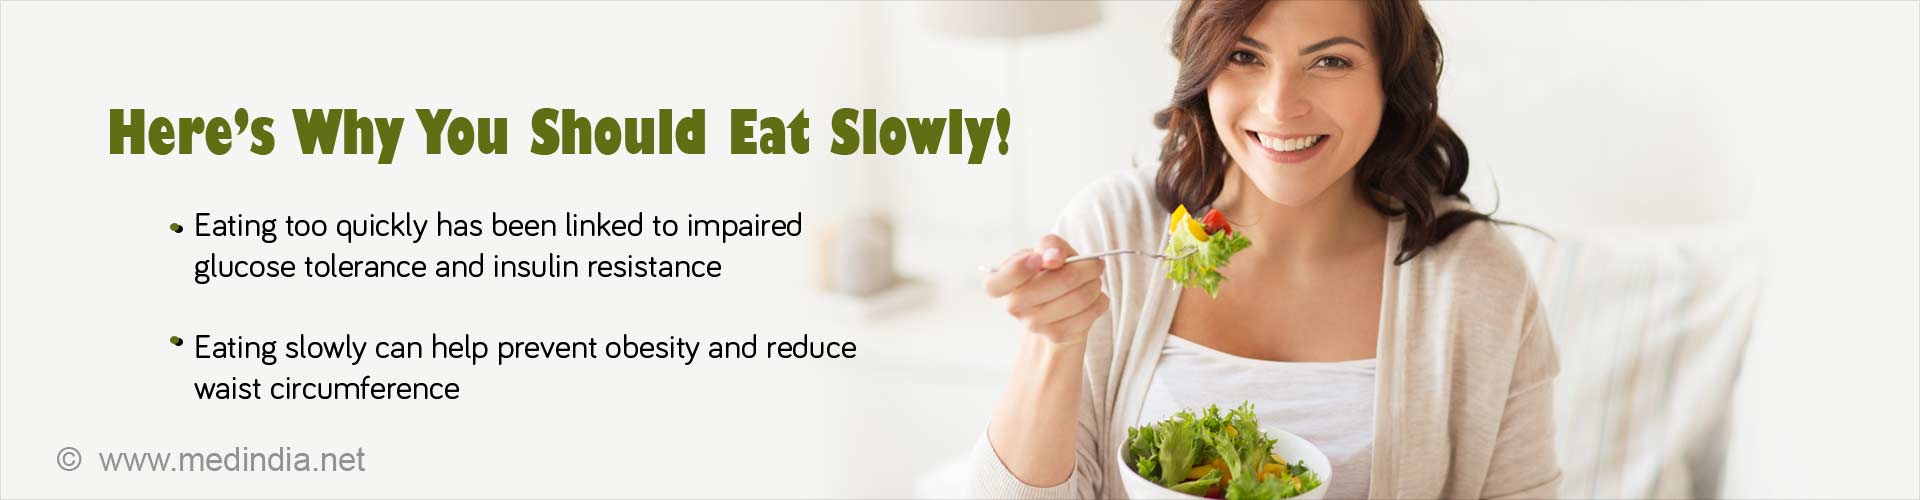 Here''s why  you should eat slowly!
- eating too quickly has been linked to impaired glucose tolerance and insulin resistance
- eating slowly can help prevent obesity and reduce waist circumference